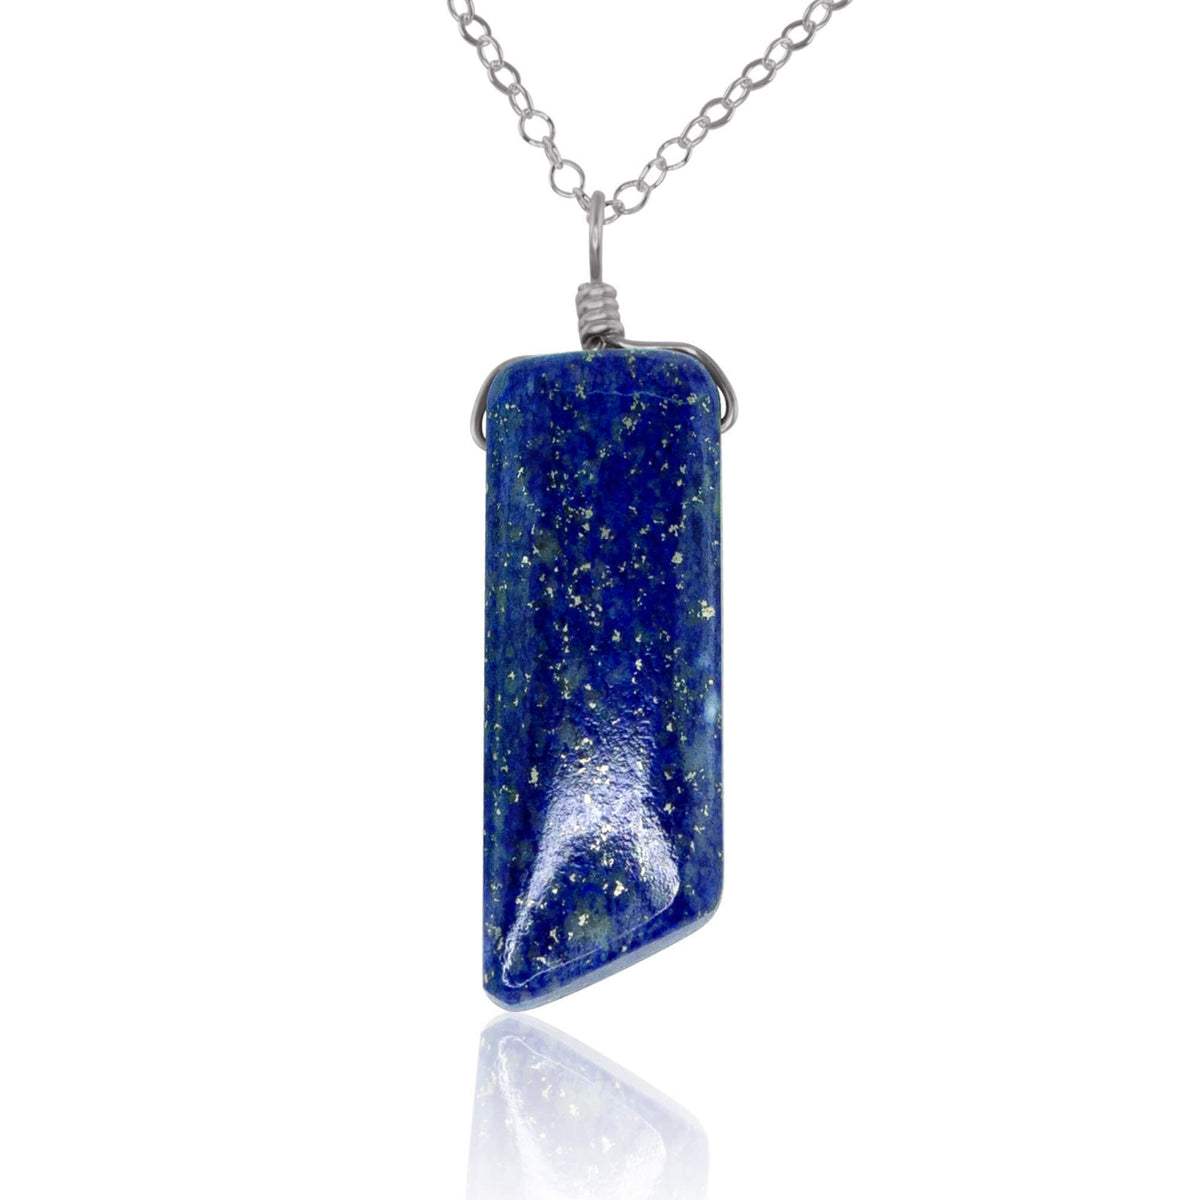 Smooth Point Pendant Necklace - Lapis Lazuli - Stainless Steel - Luna Tide Handmade Jewellery